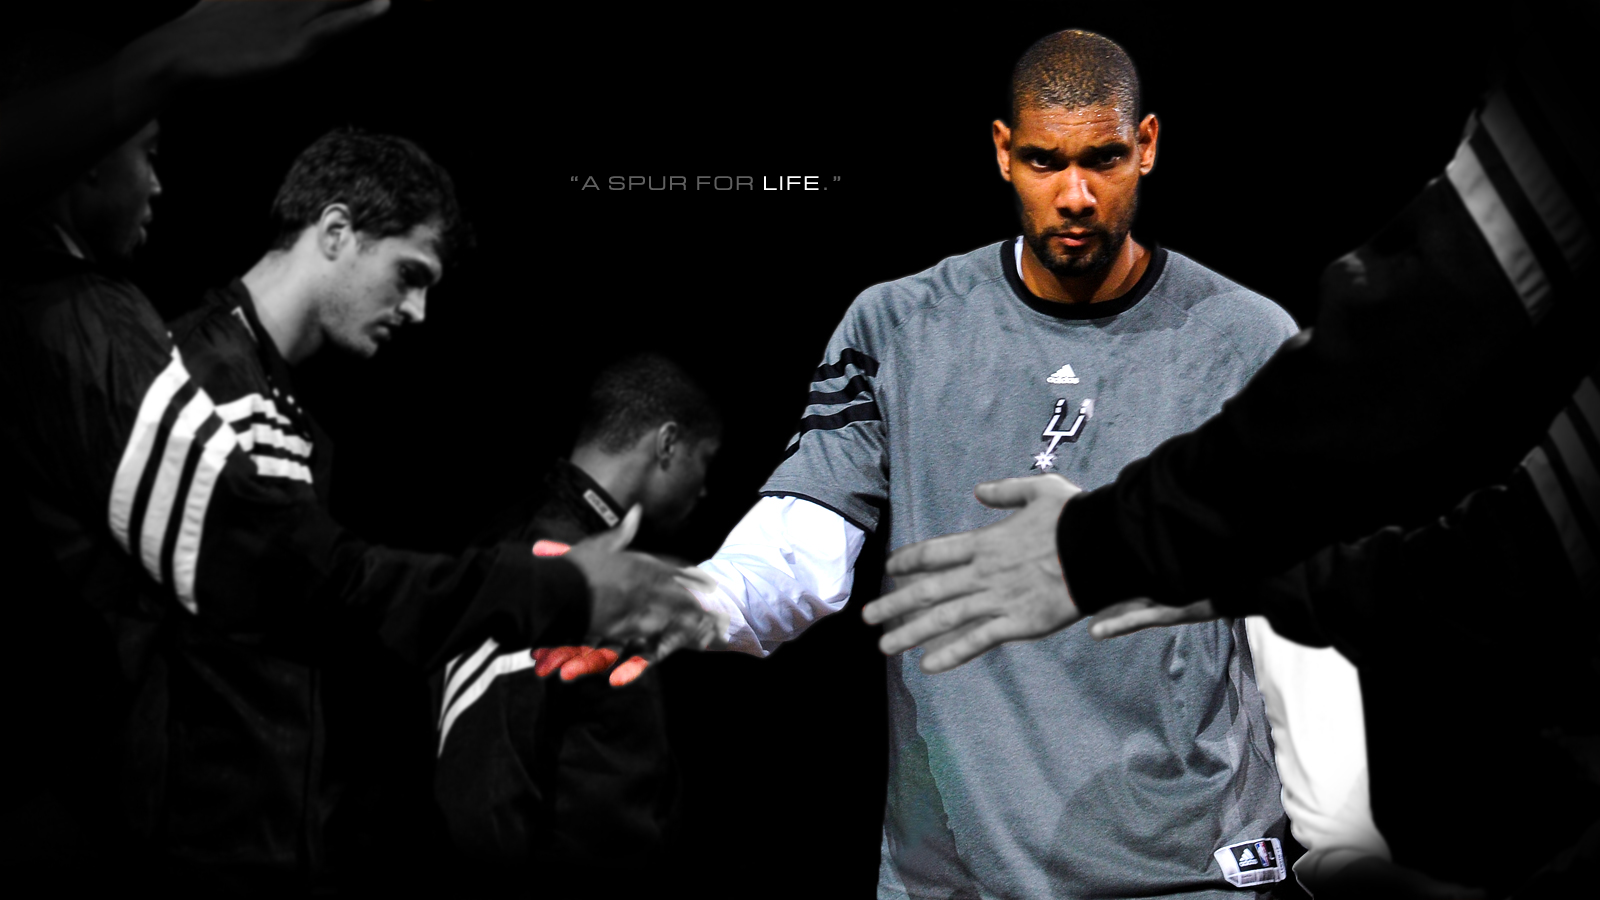 Puter Wallpaper The Official Site Of San Antonio Spurs